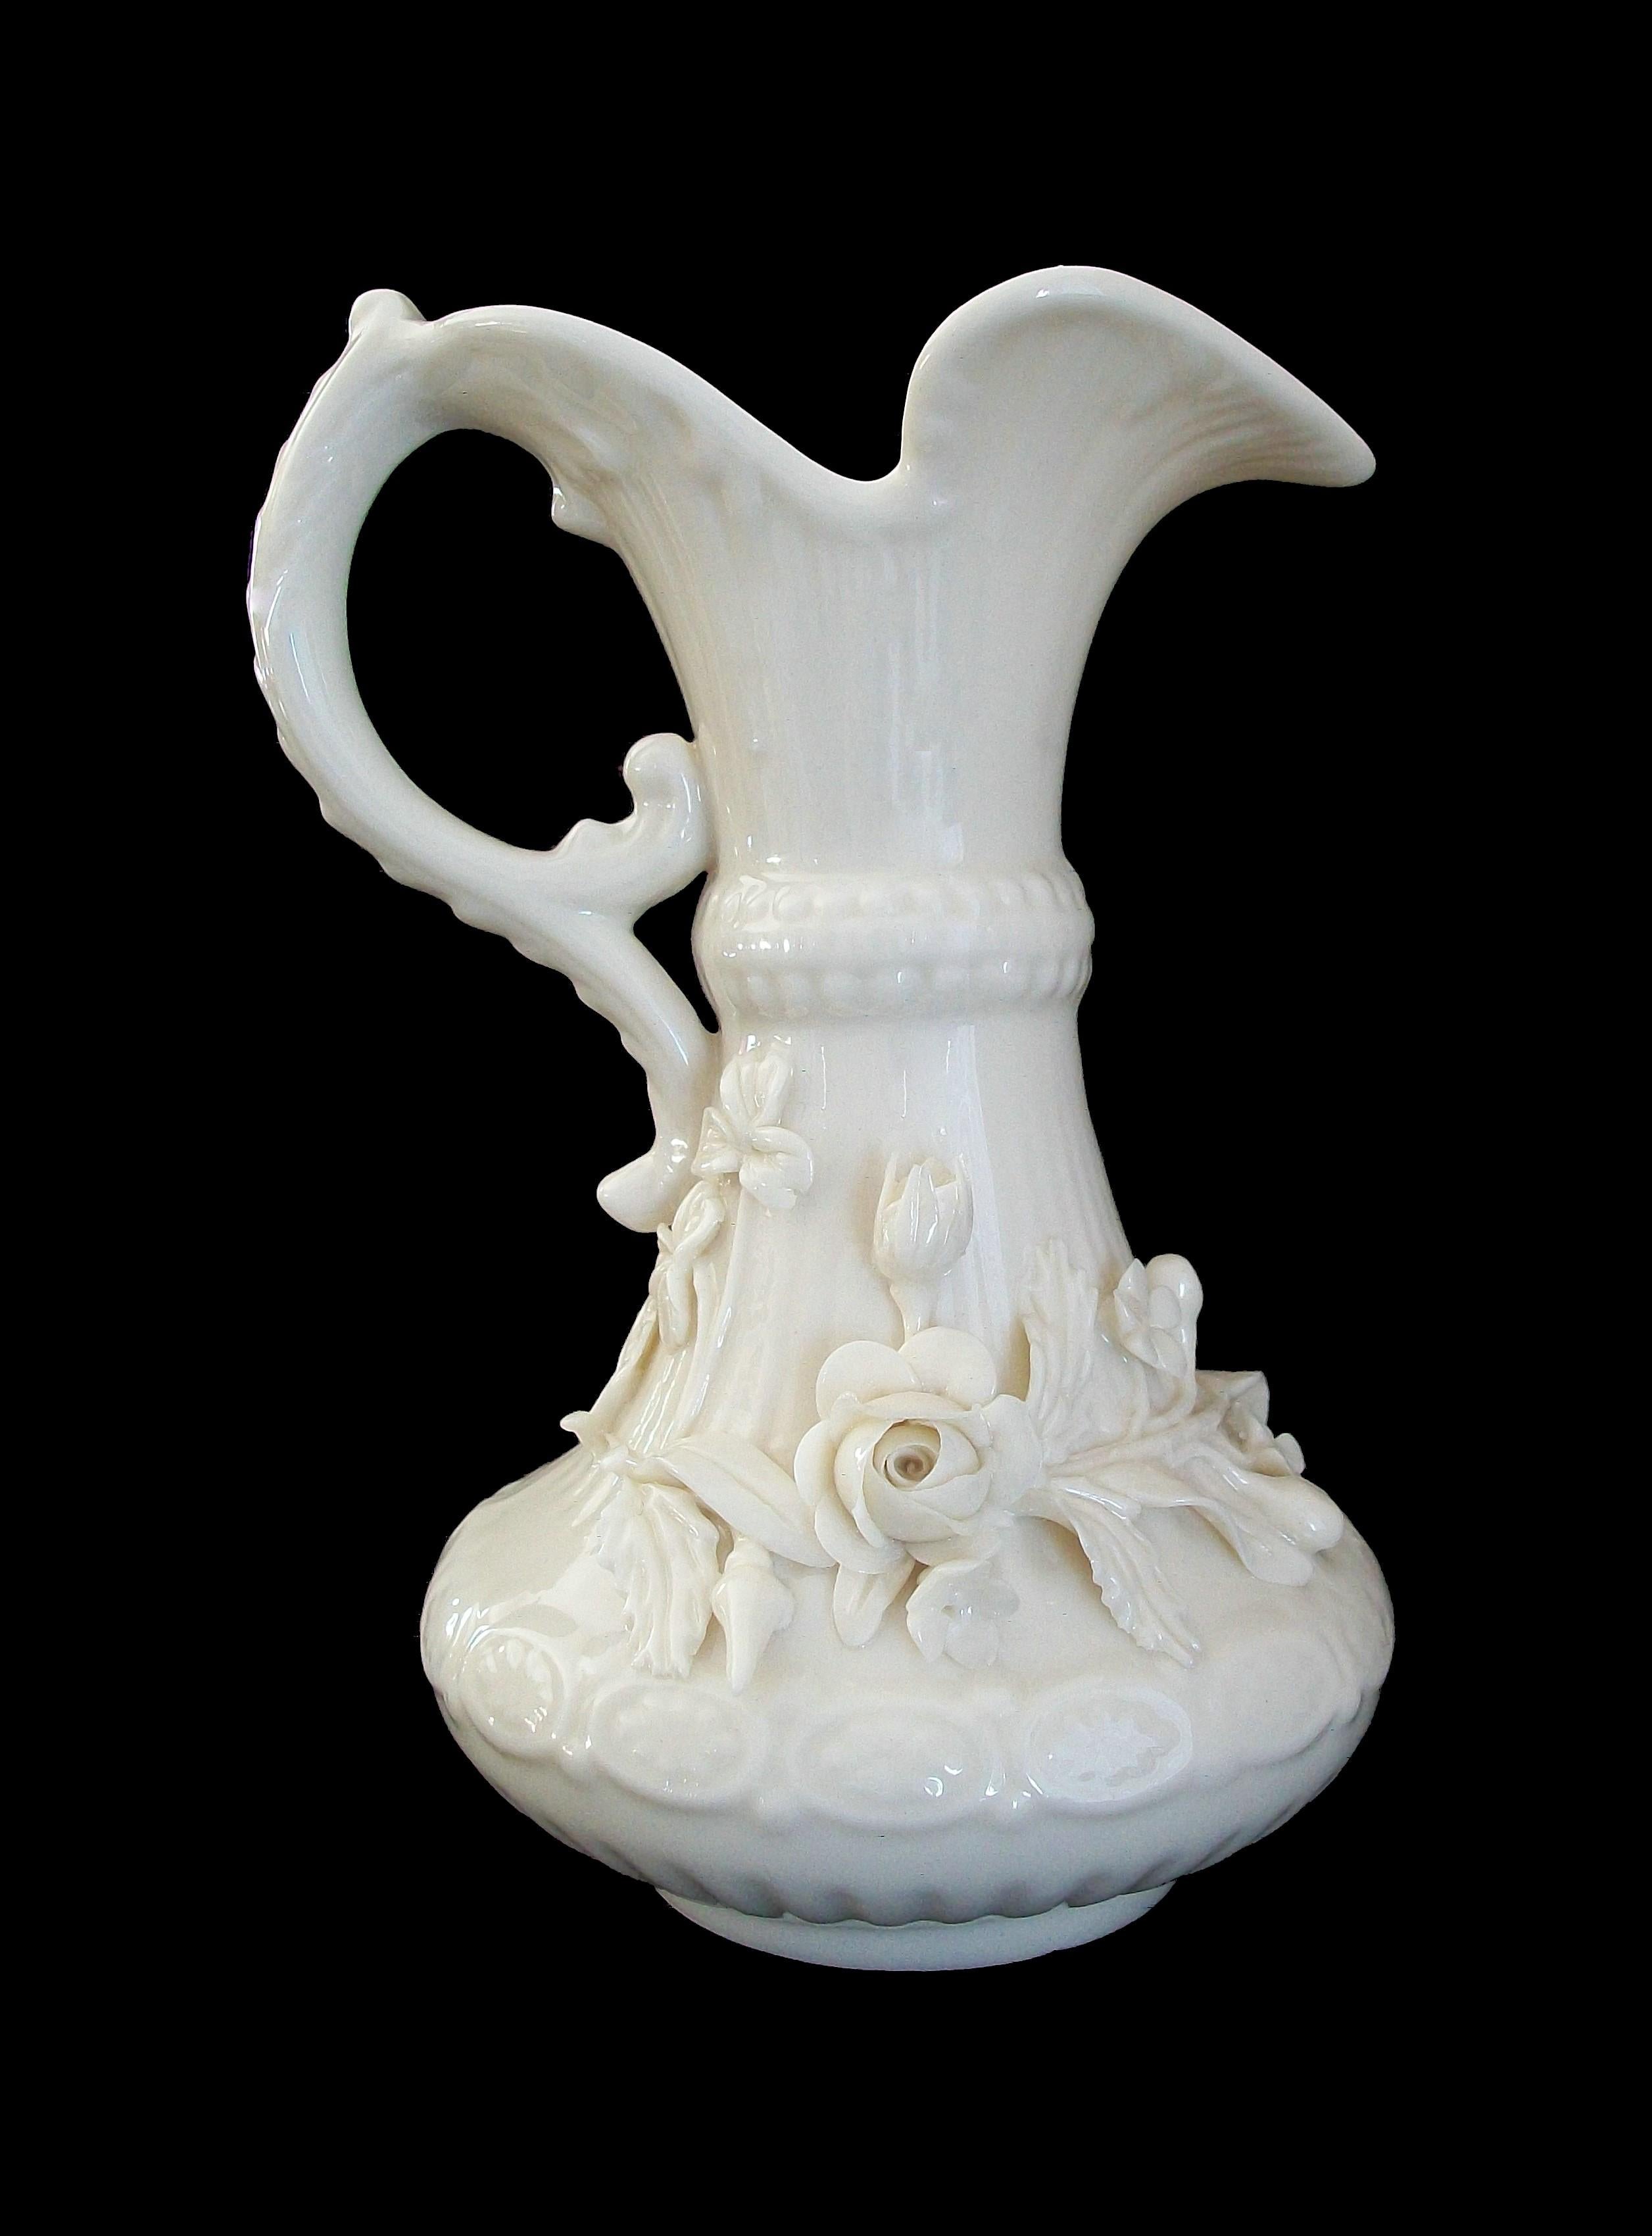 BELLEEK (Manufacturer) - Vintage ceramic ewer - featuring applied porcelain floral decoration to the body - 3rd green maker's mark to the bottom - Ireland - circa 1965-1980.

Excellent/mint vintage condition - no loss - no damage - no restoration